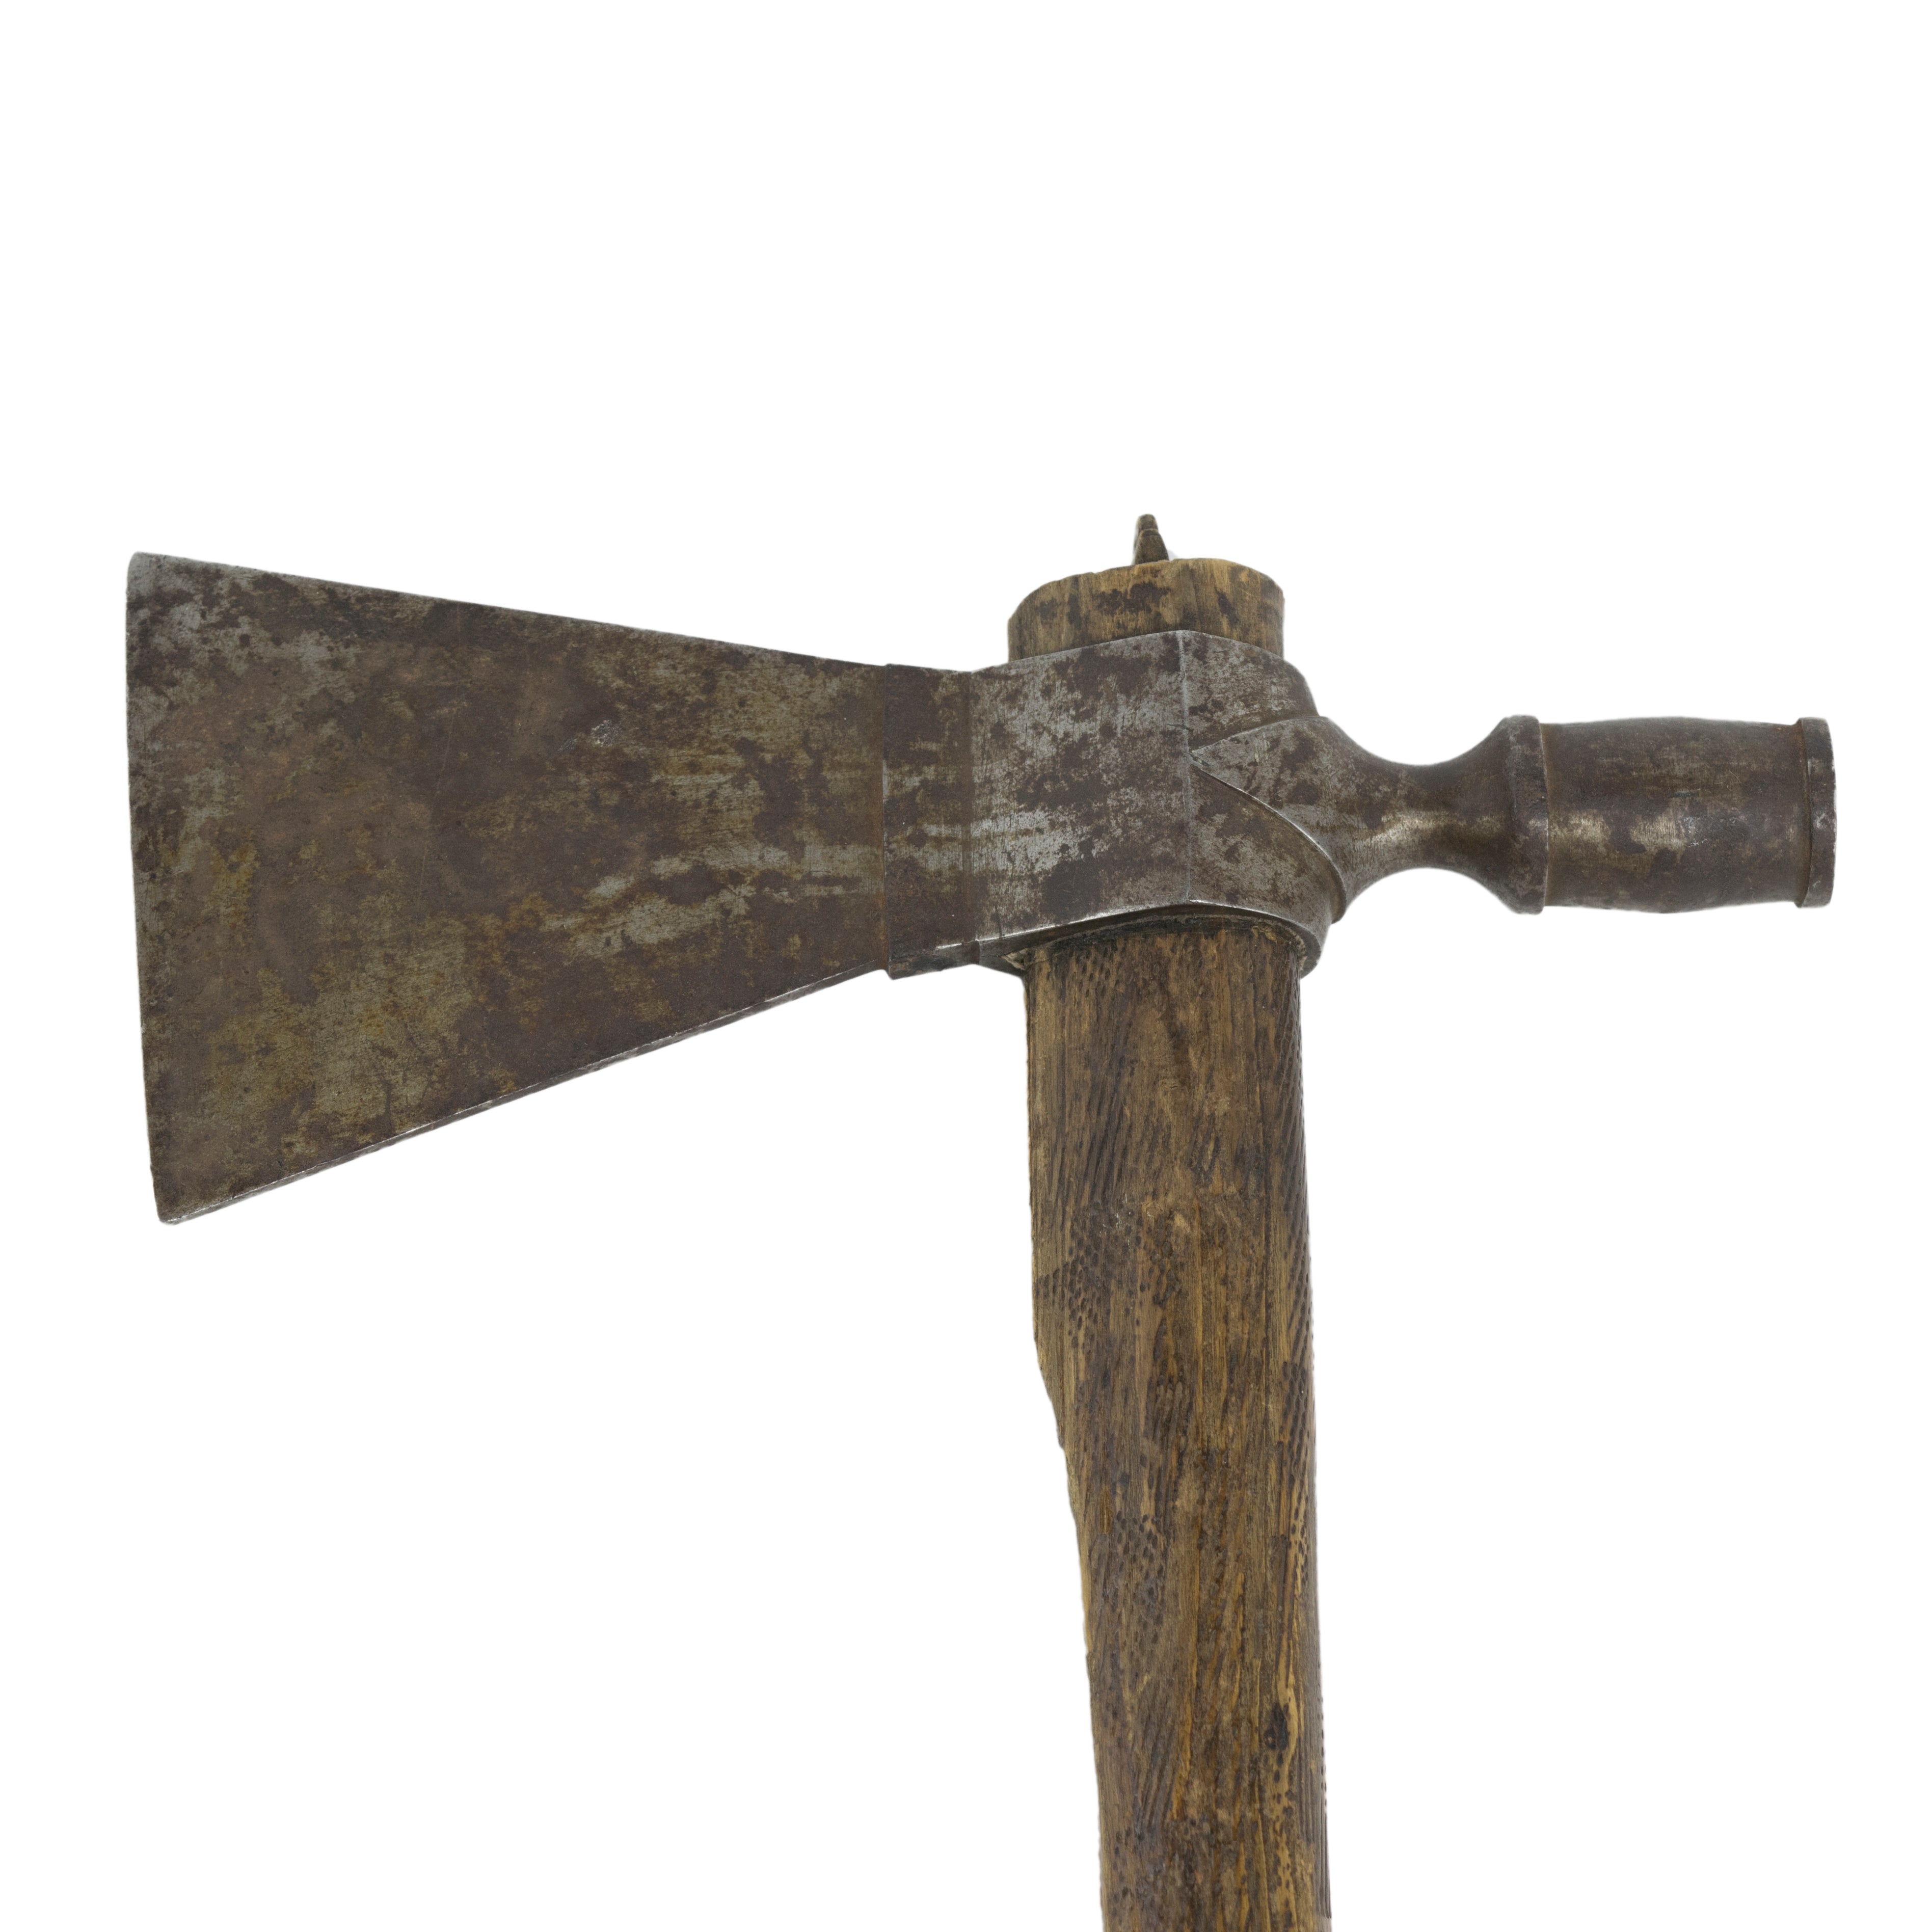 Northern Plains Pipe Tomahawk